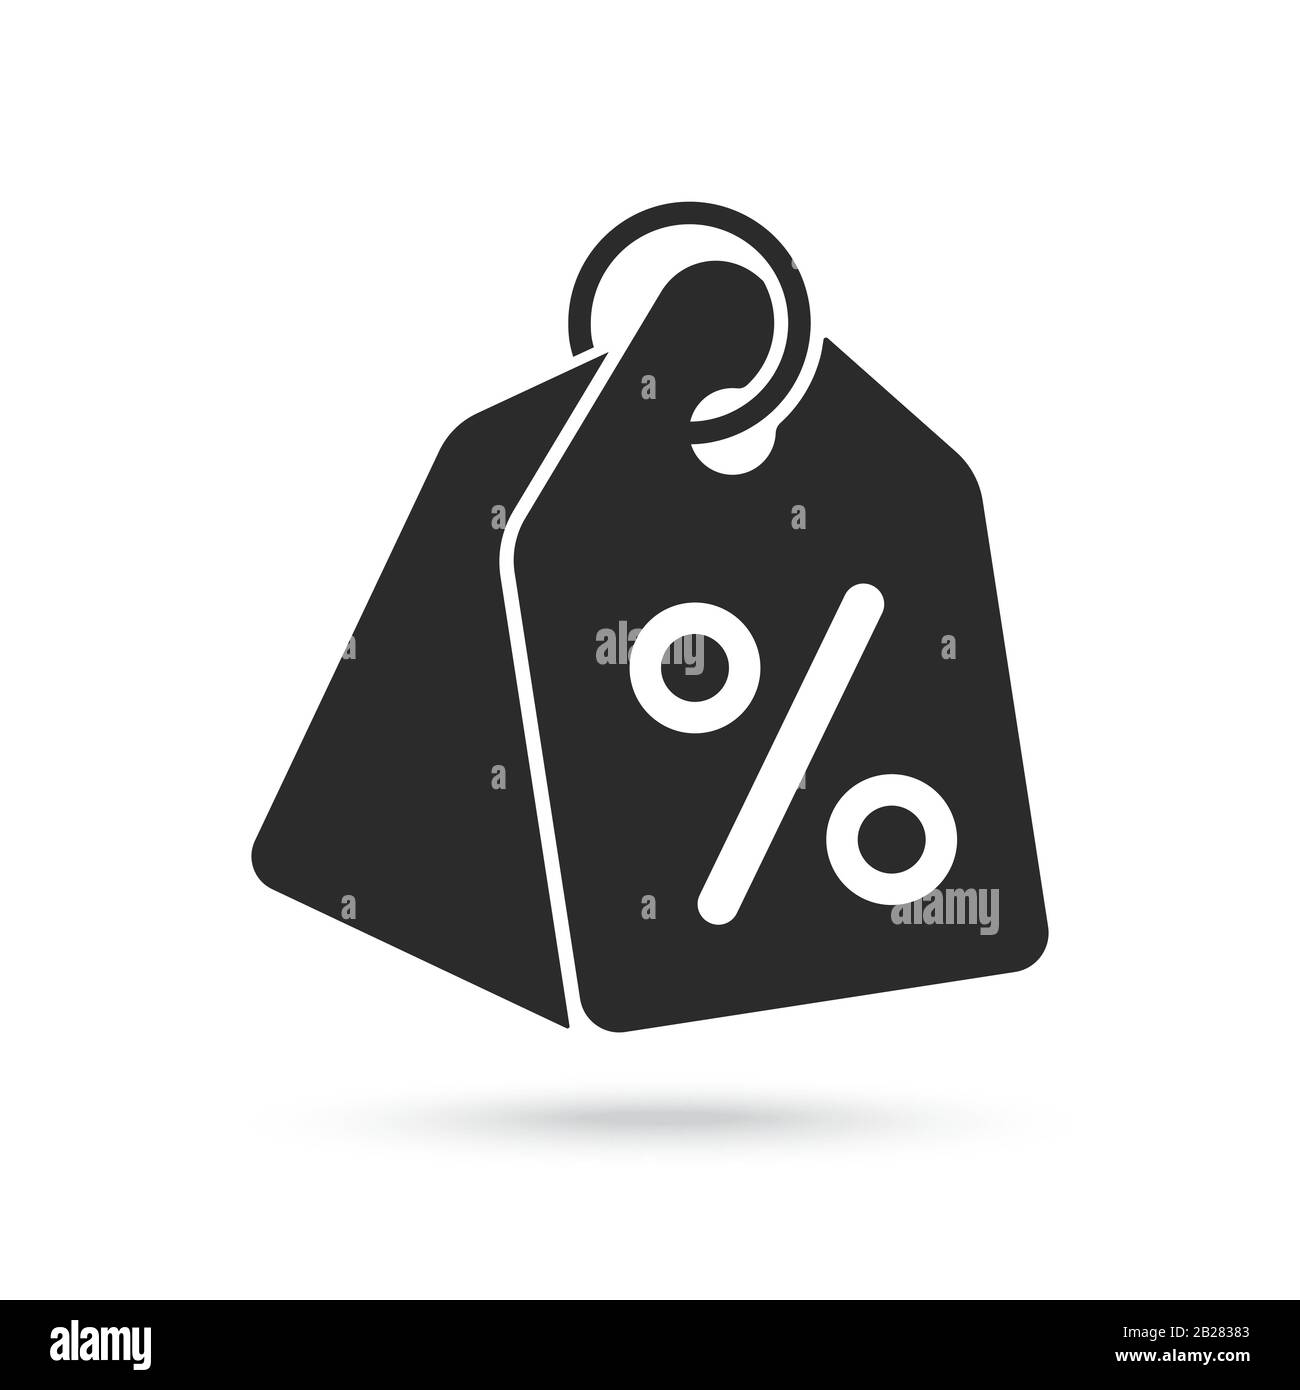 Price tag icon. Shopping tags simple icon. Flat vector illustration. Stock Vector